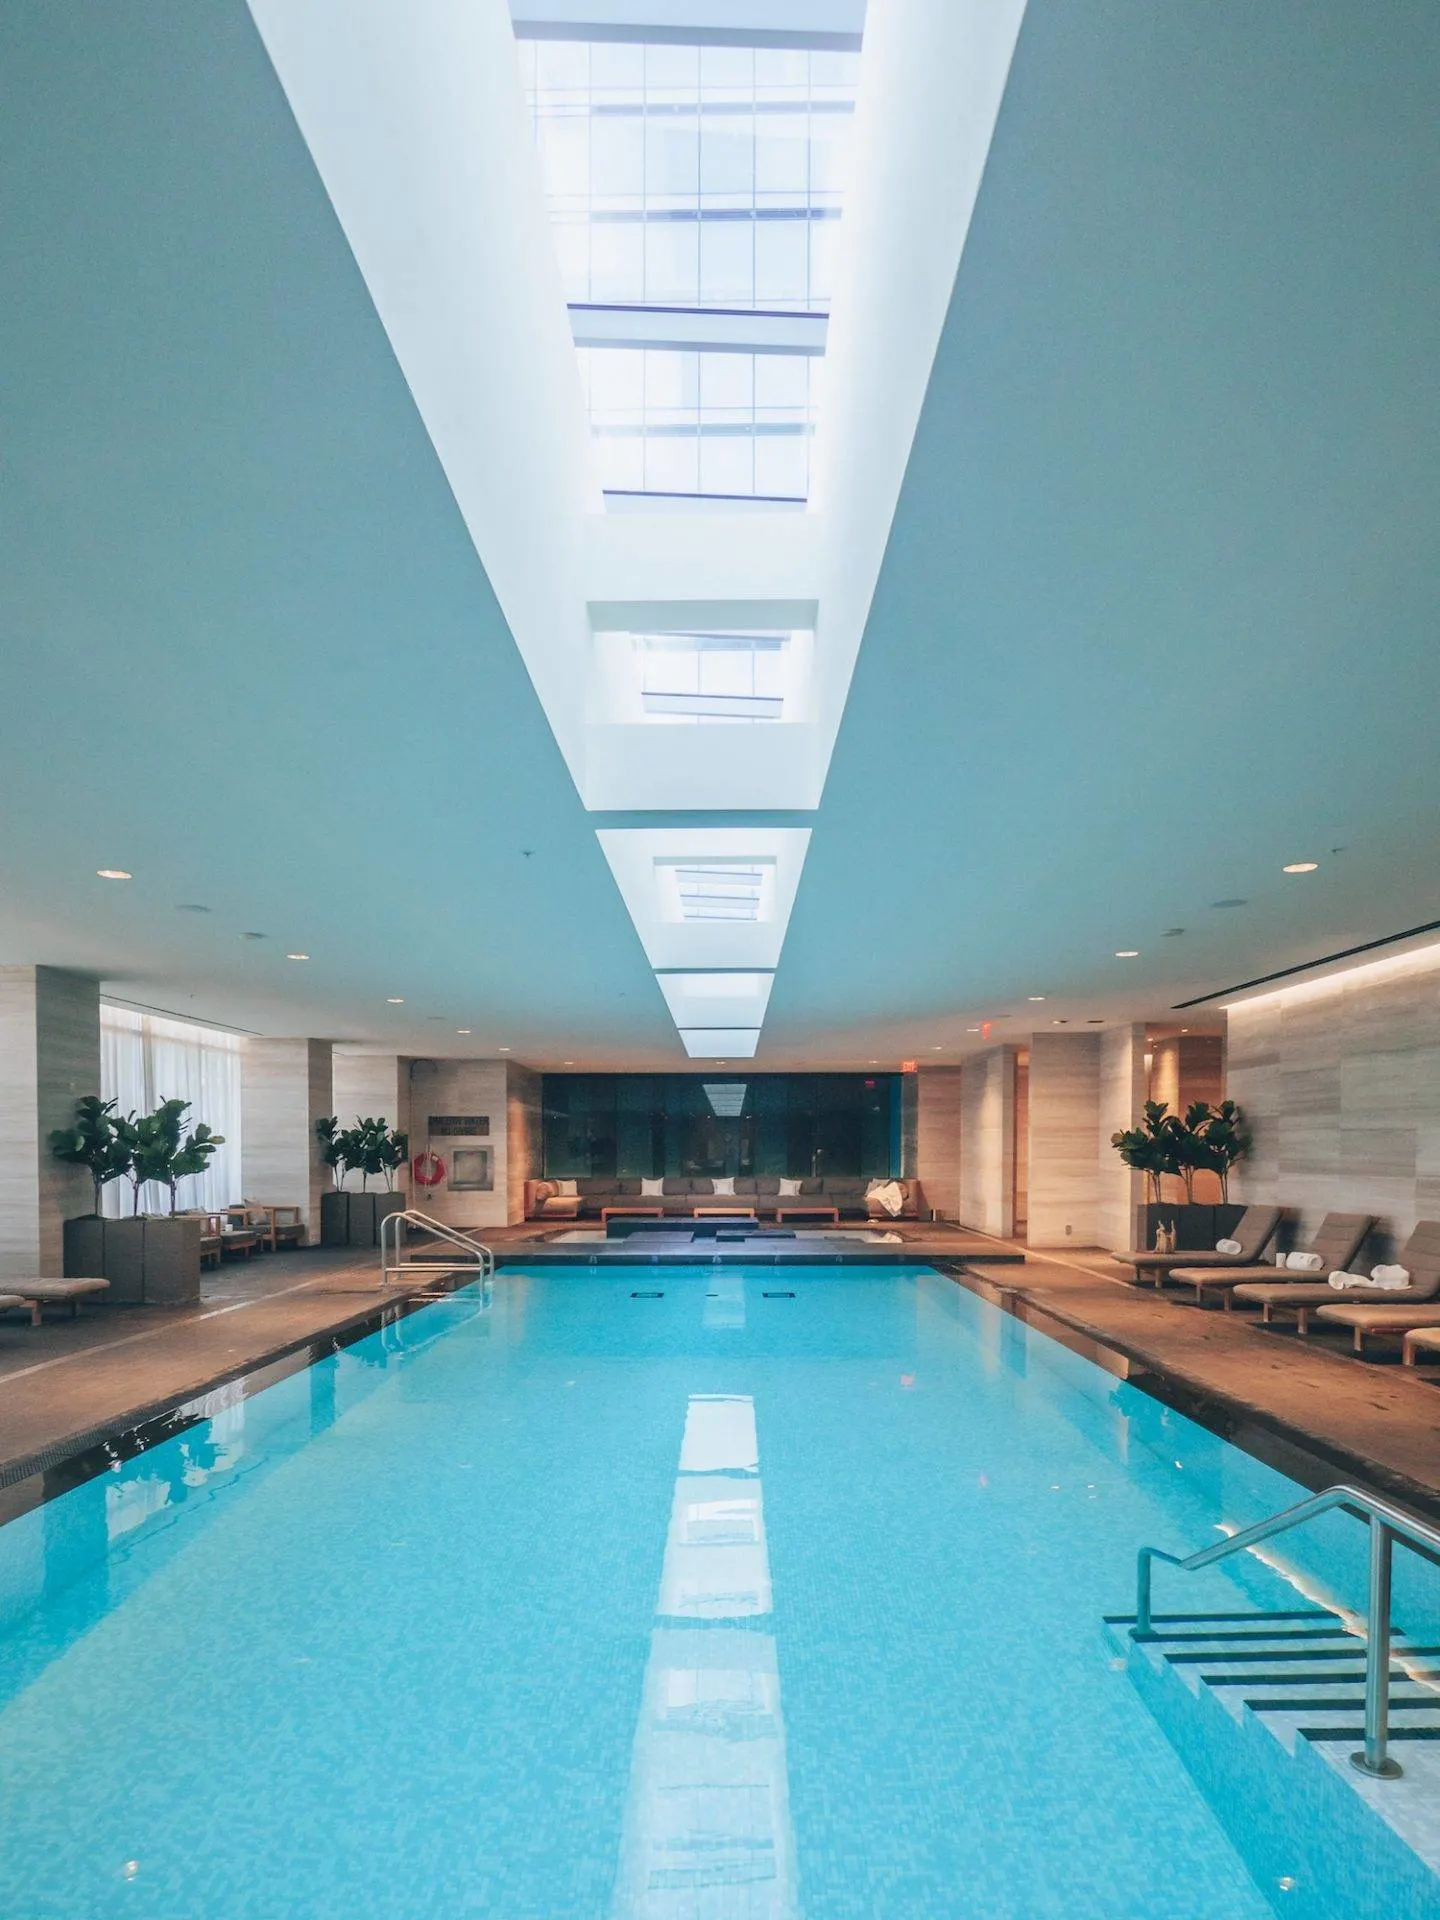 Four Seasons Toronto has the best indoor relaxation pool. Click to read the rest of the review and 18 reasons you'll love staying at this hotel!